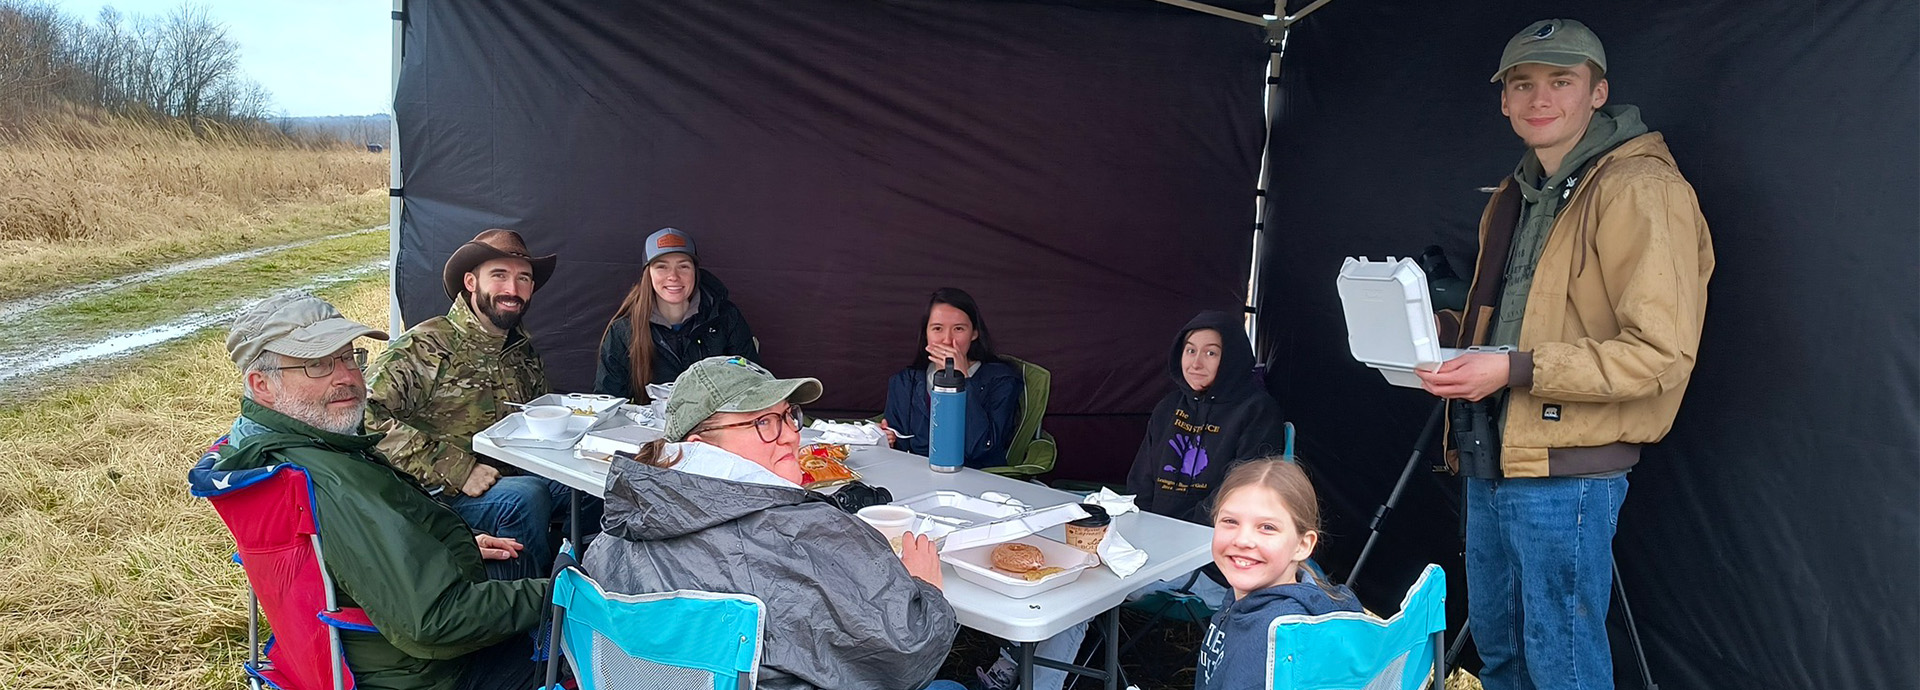 Slideshow Image - Several employees eating lunch in an outdoor tent